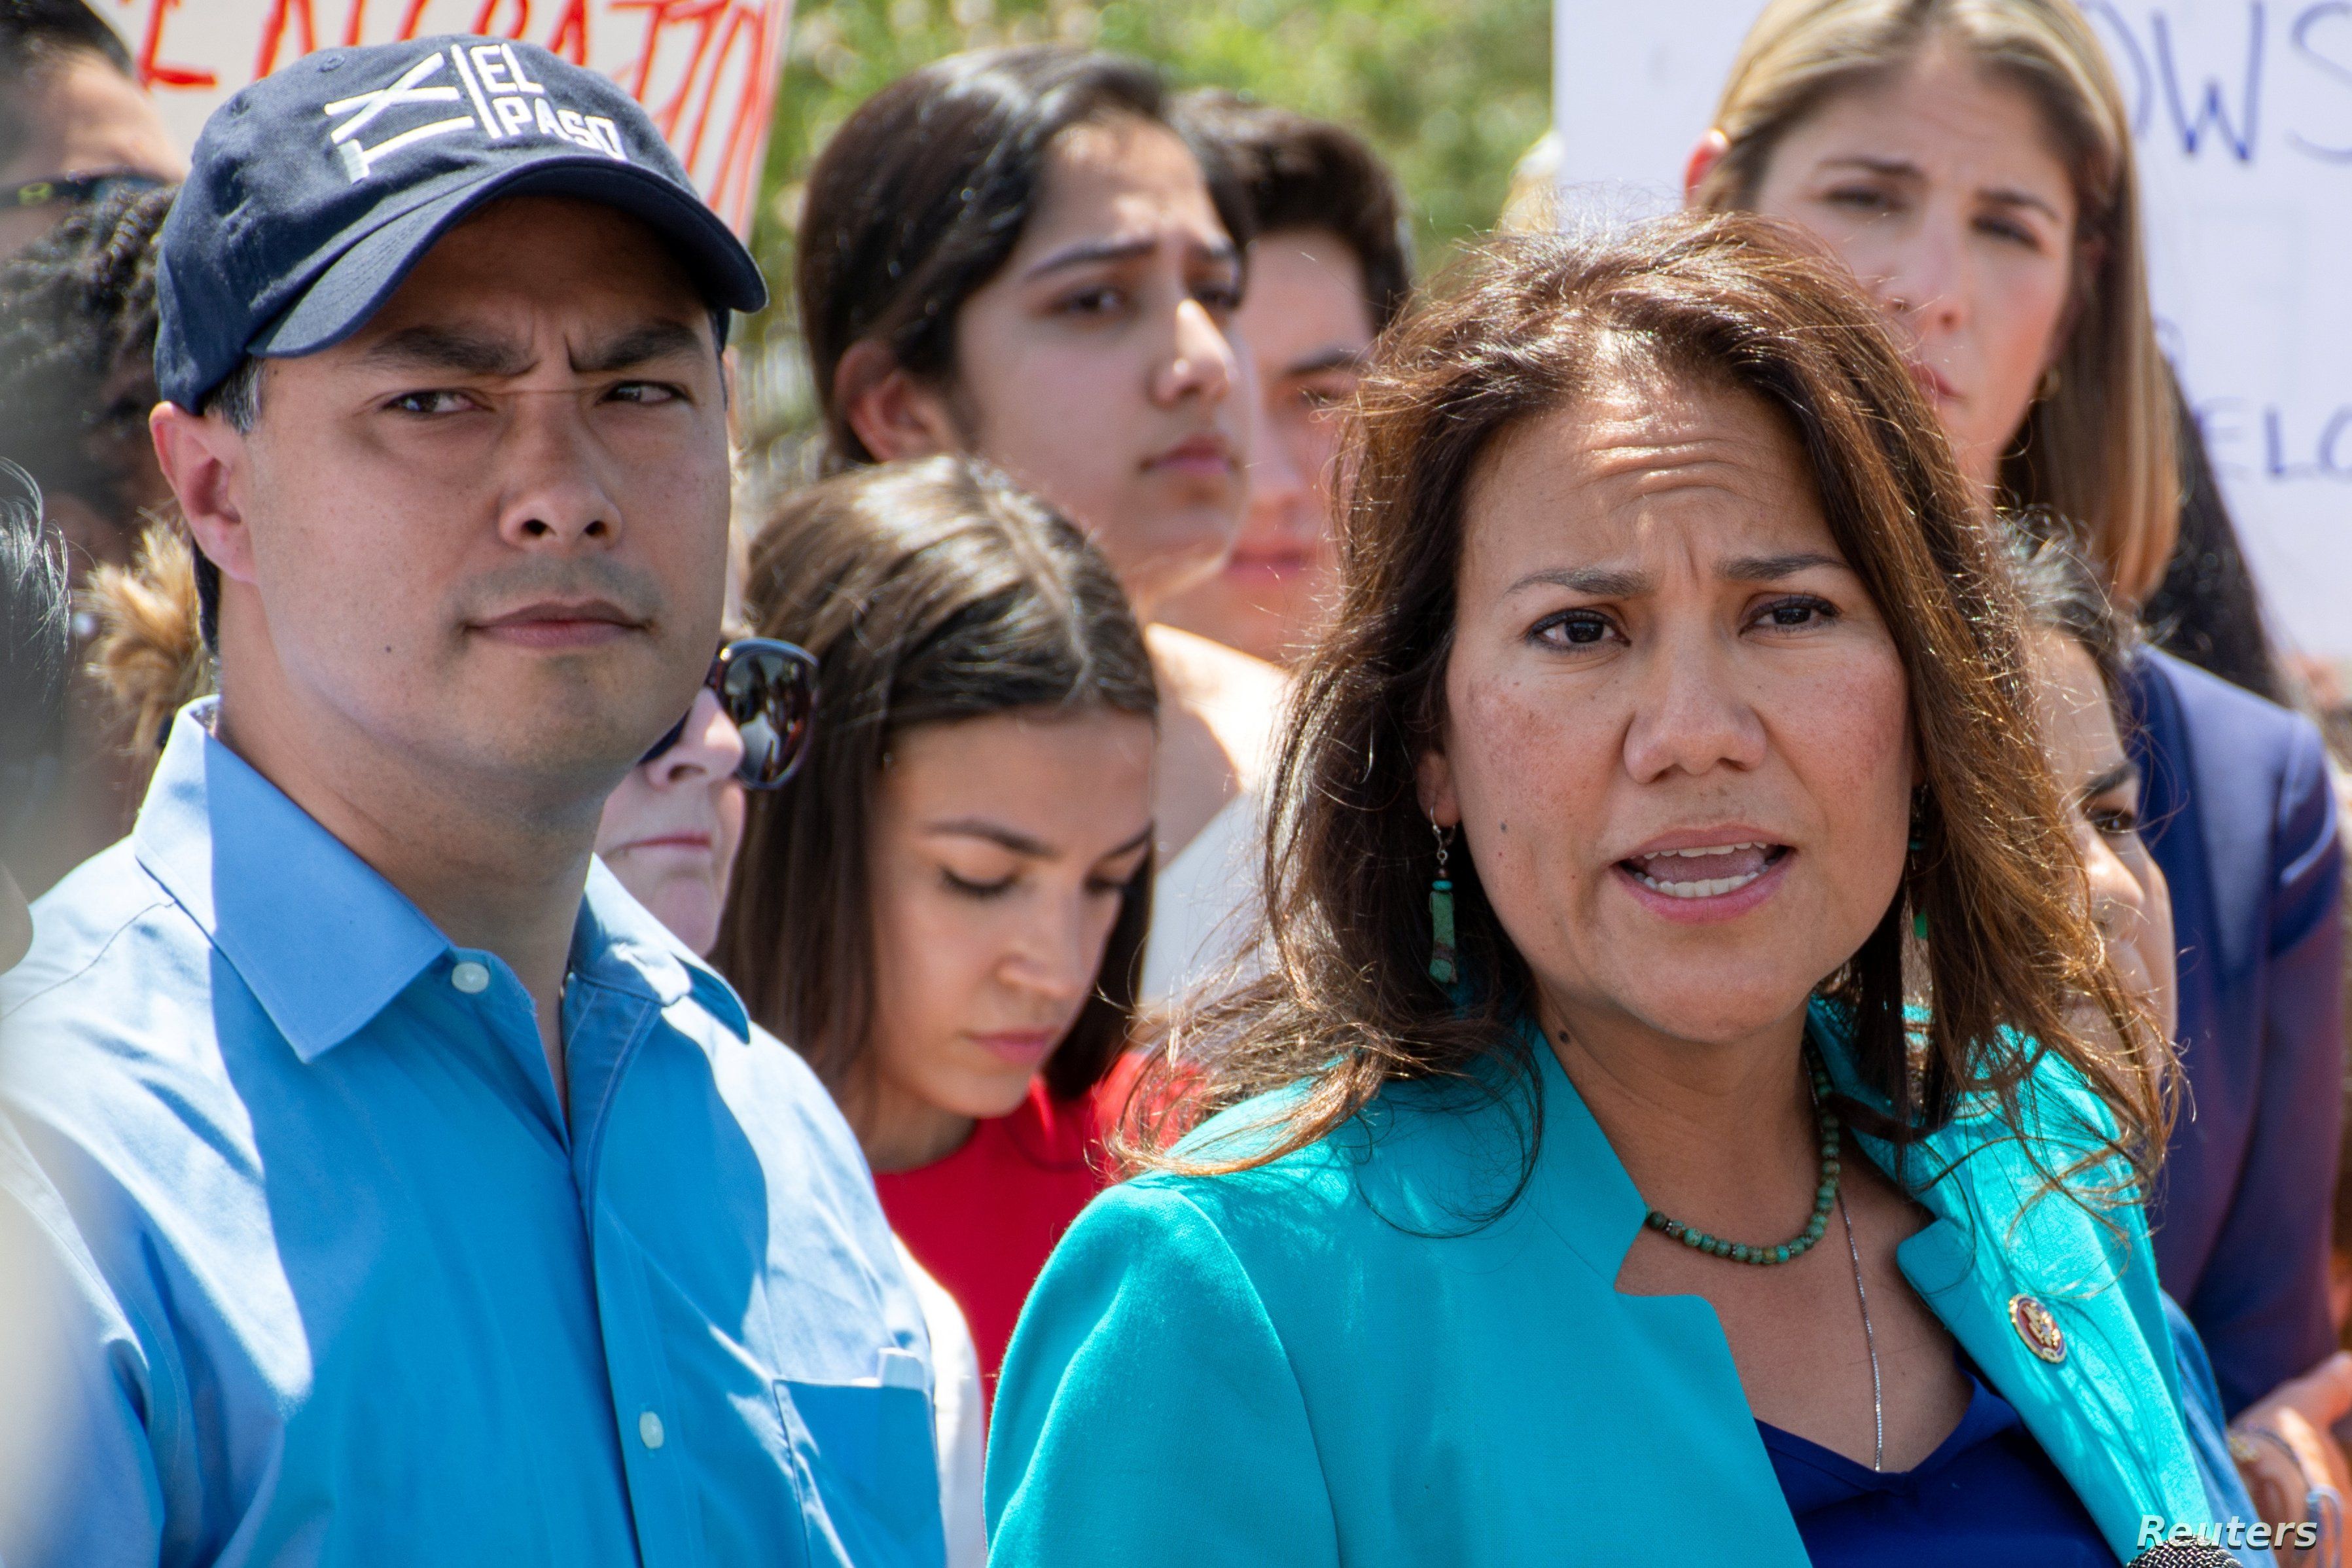  U.S. Representative Veronica Escobar from El Paso speaks to the news media along with Rep. Joaquin Castro and Rep. Alexandria Ocasio-Cortez after they toured two Border patrol stations following reports of migrants kept in inadequate conditions, in Clint, Texas, July 1, 2019.